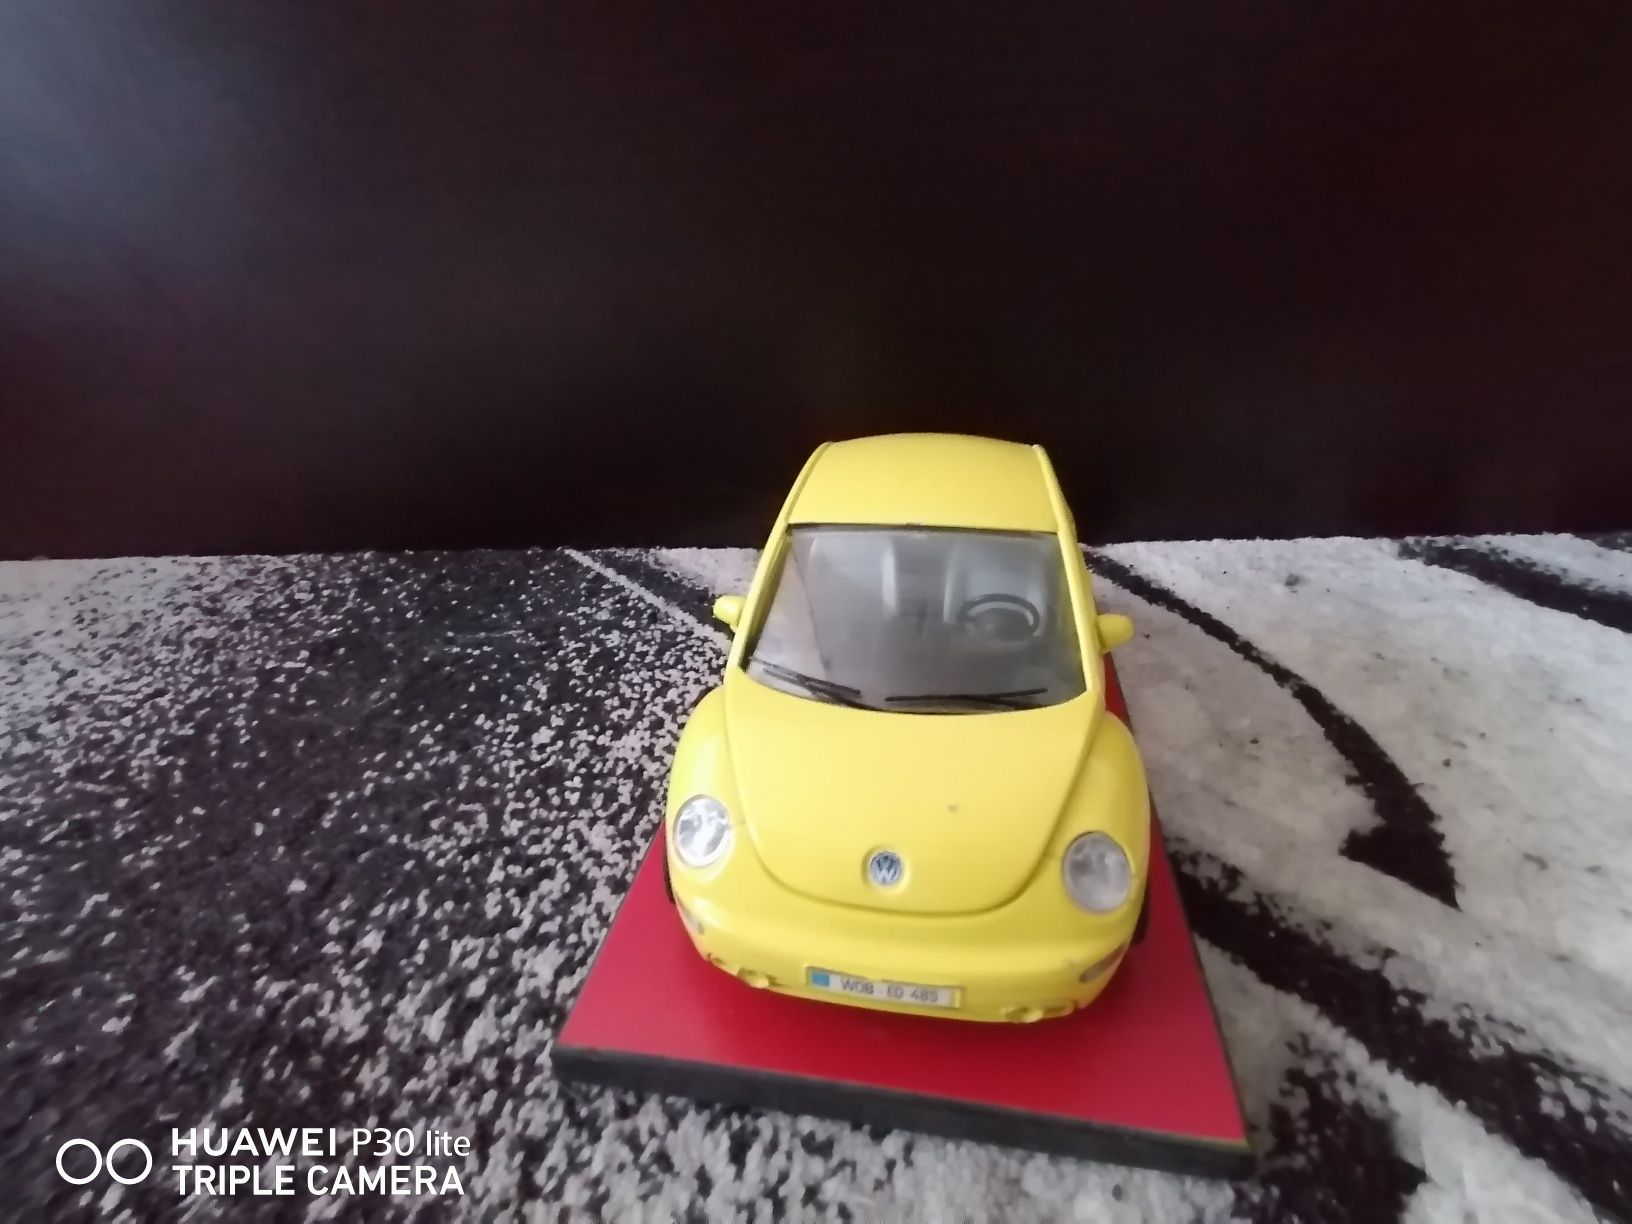 Vw beetle 1/18 made in italy